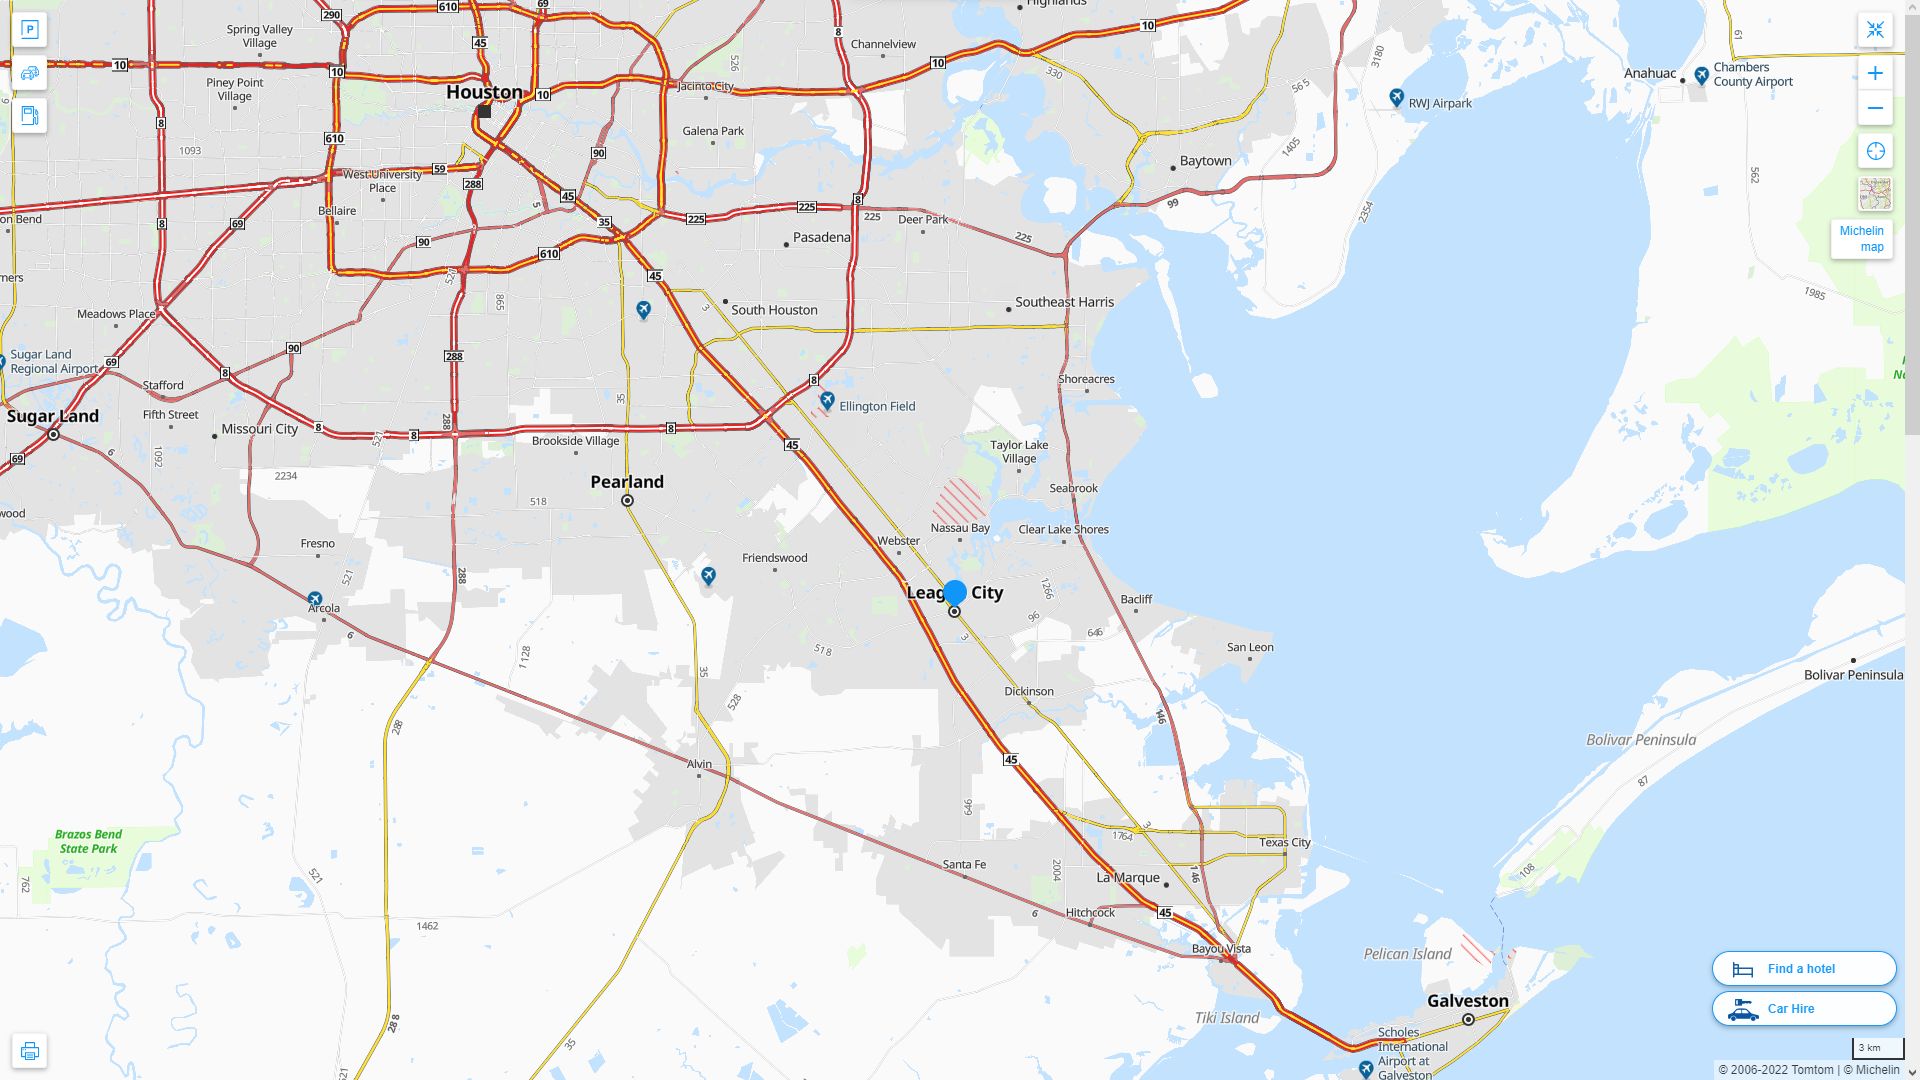 League City Texas Highway and Road Map